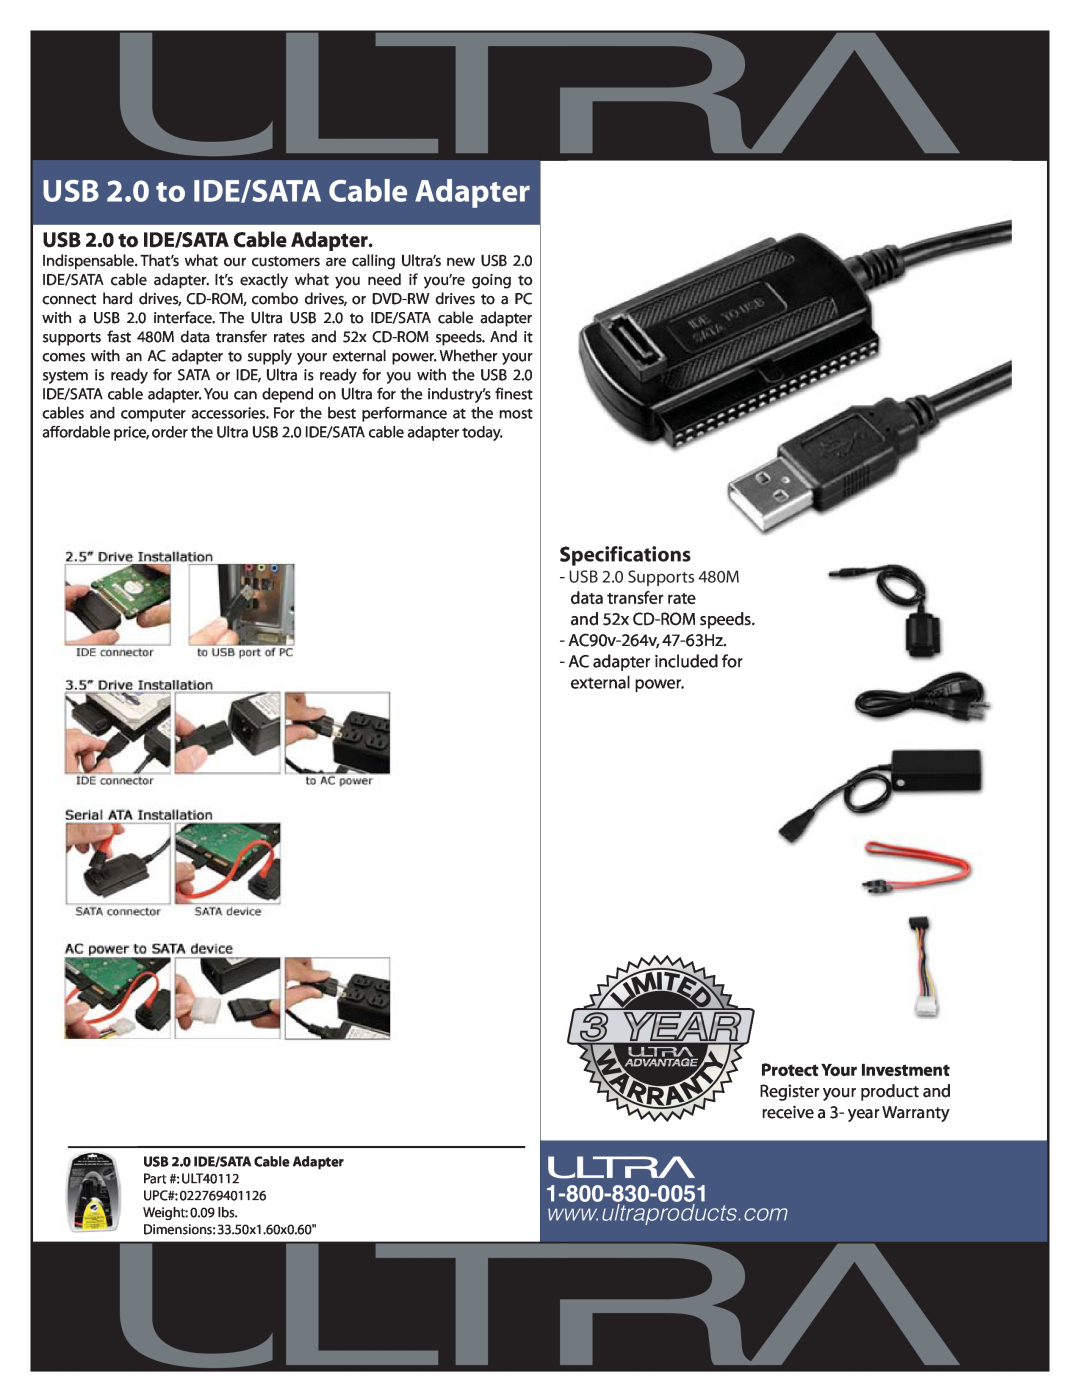 Ultra Products ULT40112 specifications USB 2.0 to IDE/SATA Cable Adapter, Specifications, USB 2.0 IDE/SATA Cable Adapter 